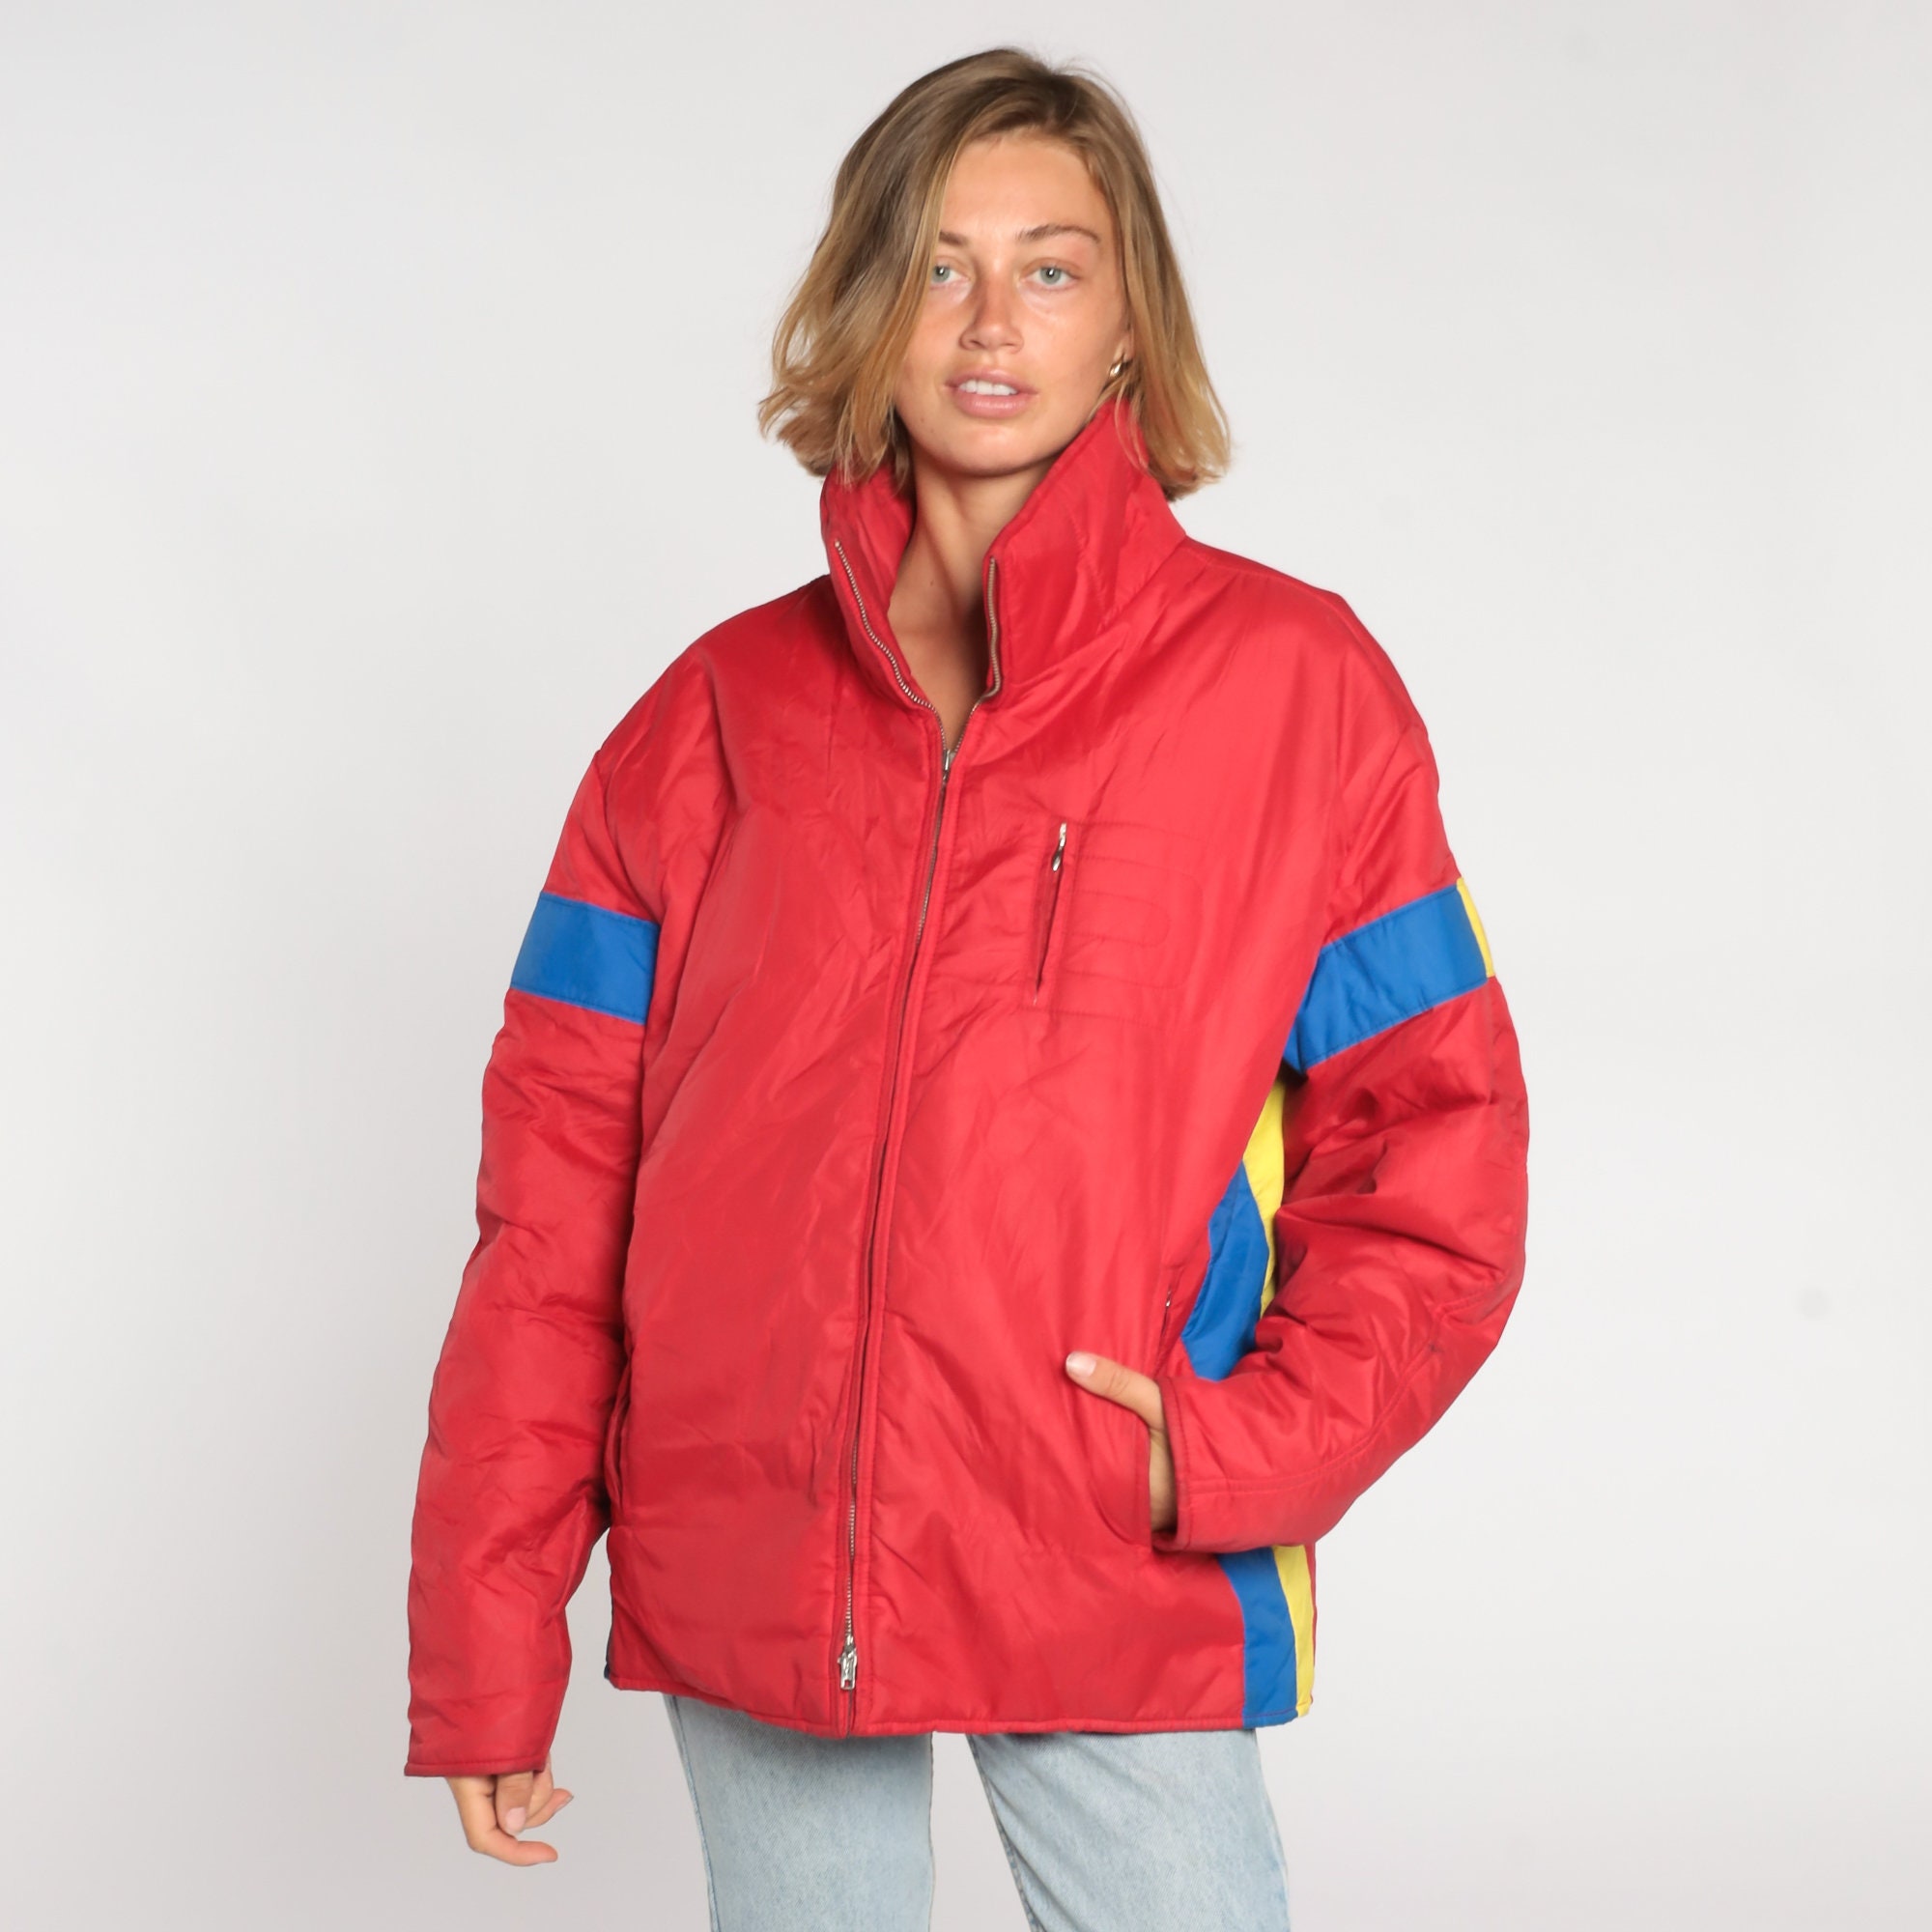 Red Ski Jacket 80s Striped Puffer Jacket Roffe Goose Down Jacket Puffy ...